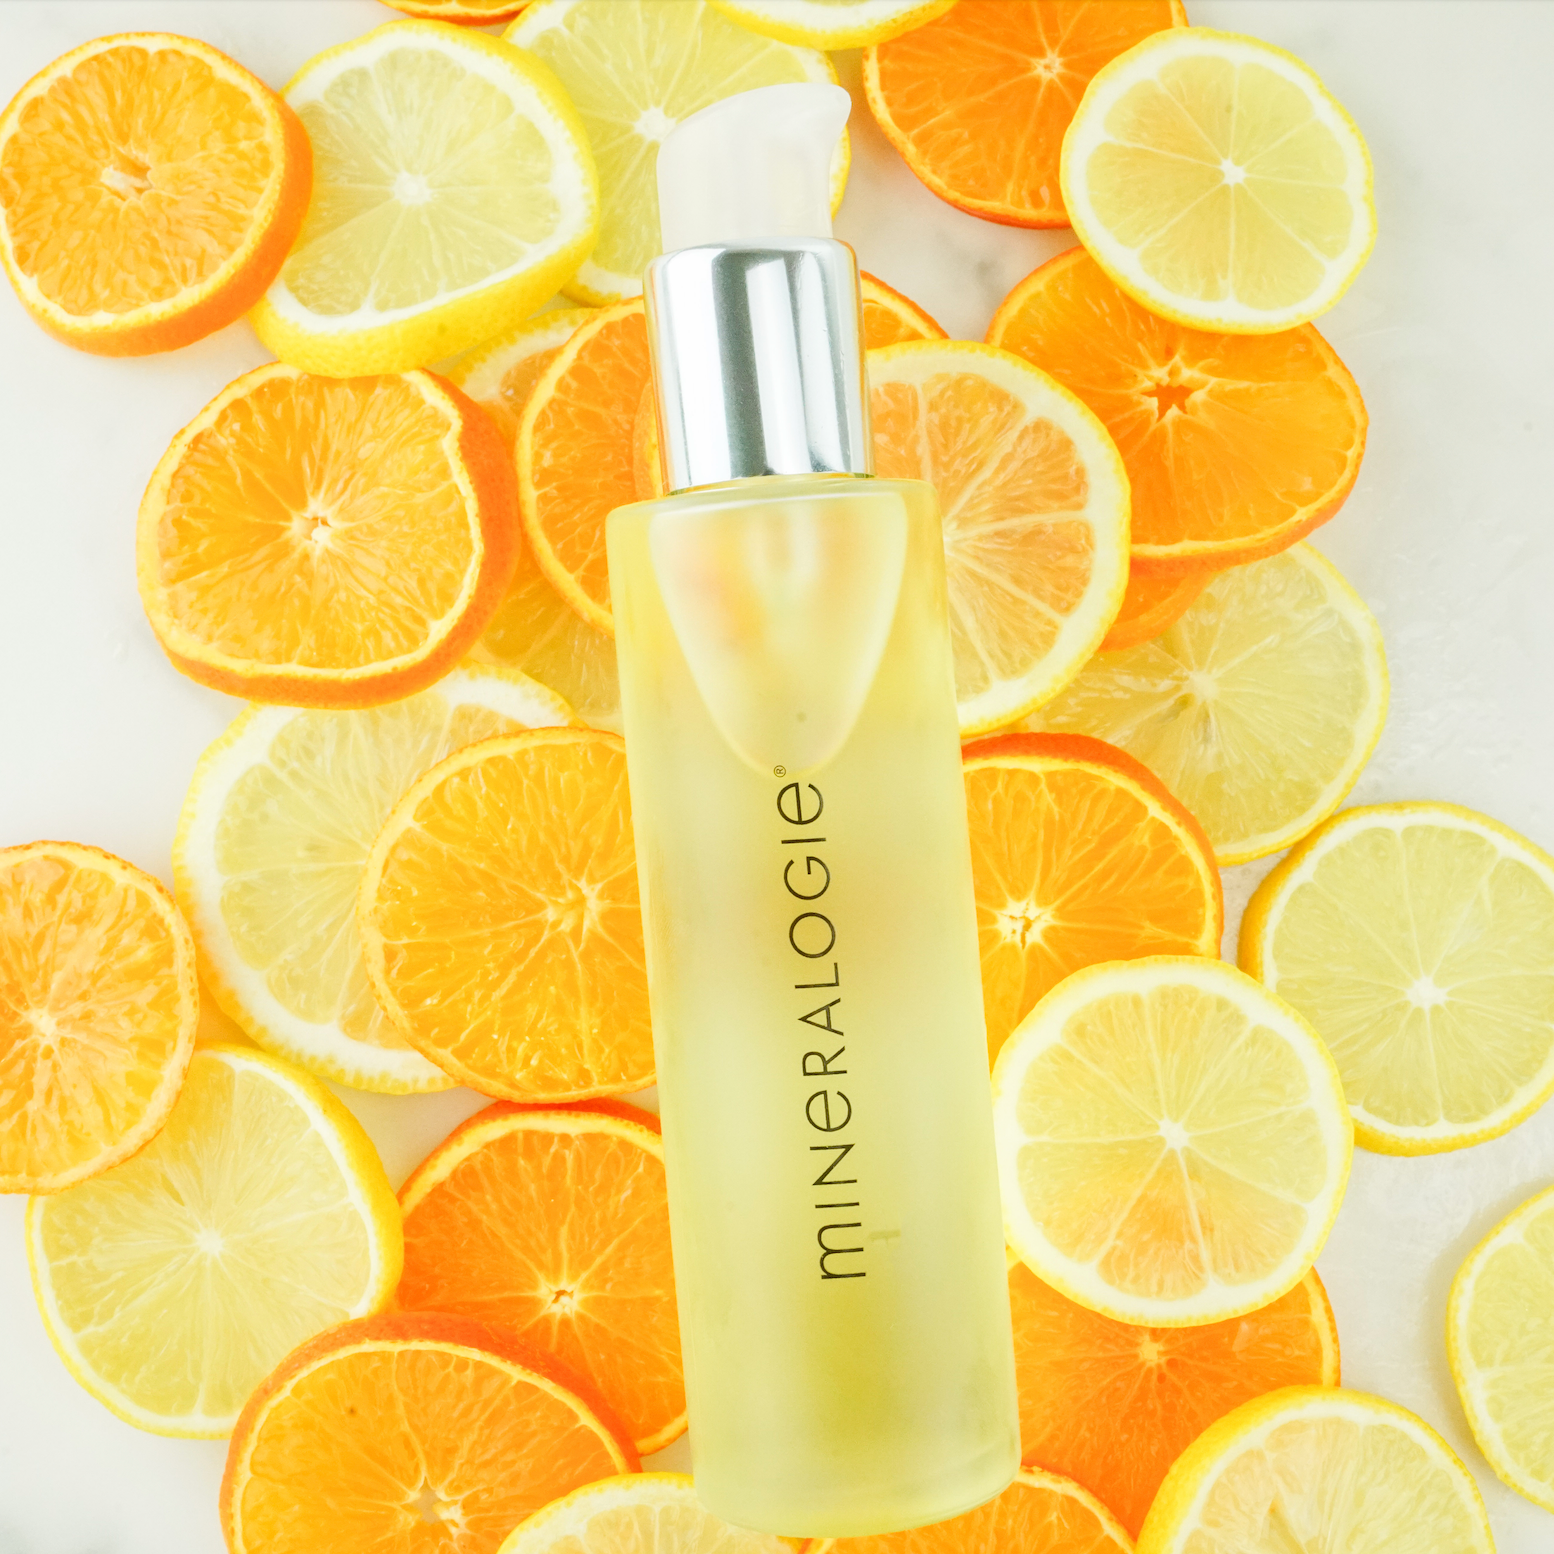 Halo Body Oil on top of lemons and tangerines